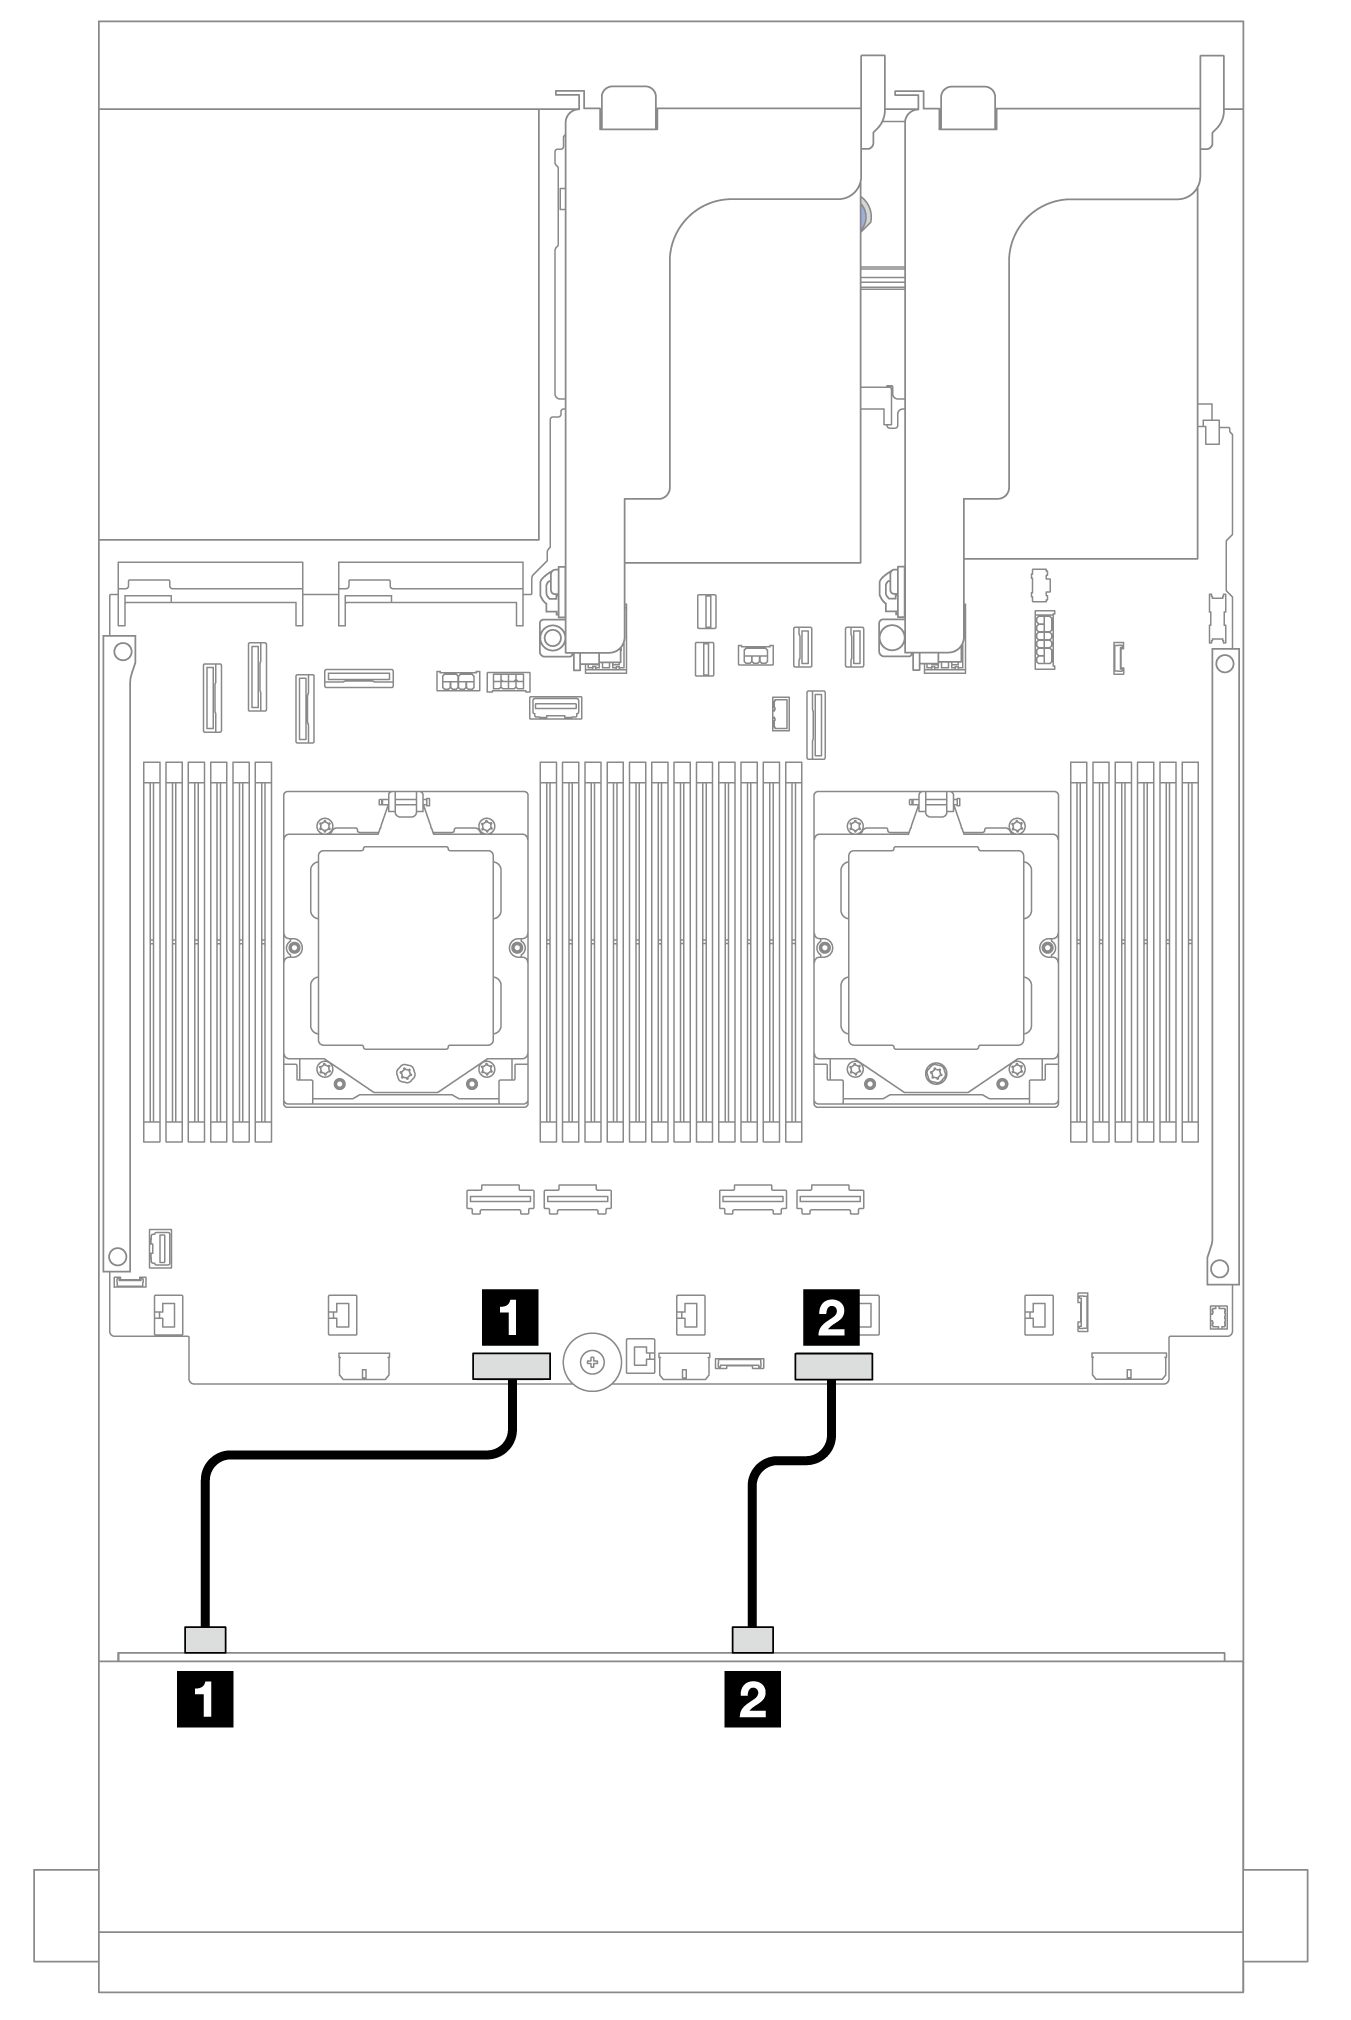 Power cable connections for the 12 x 3.5-inch SAS/SATA/AnyBay backplanes